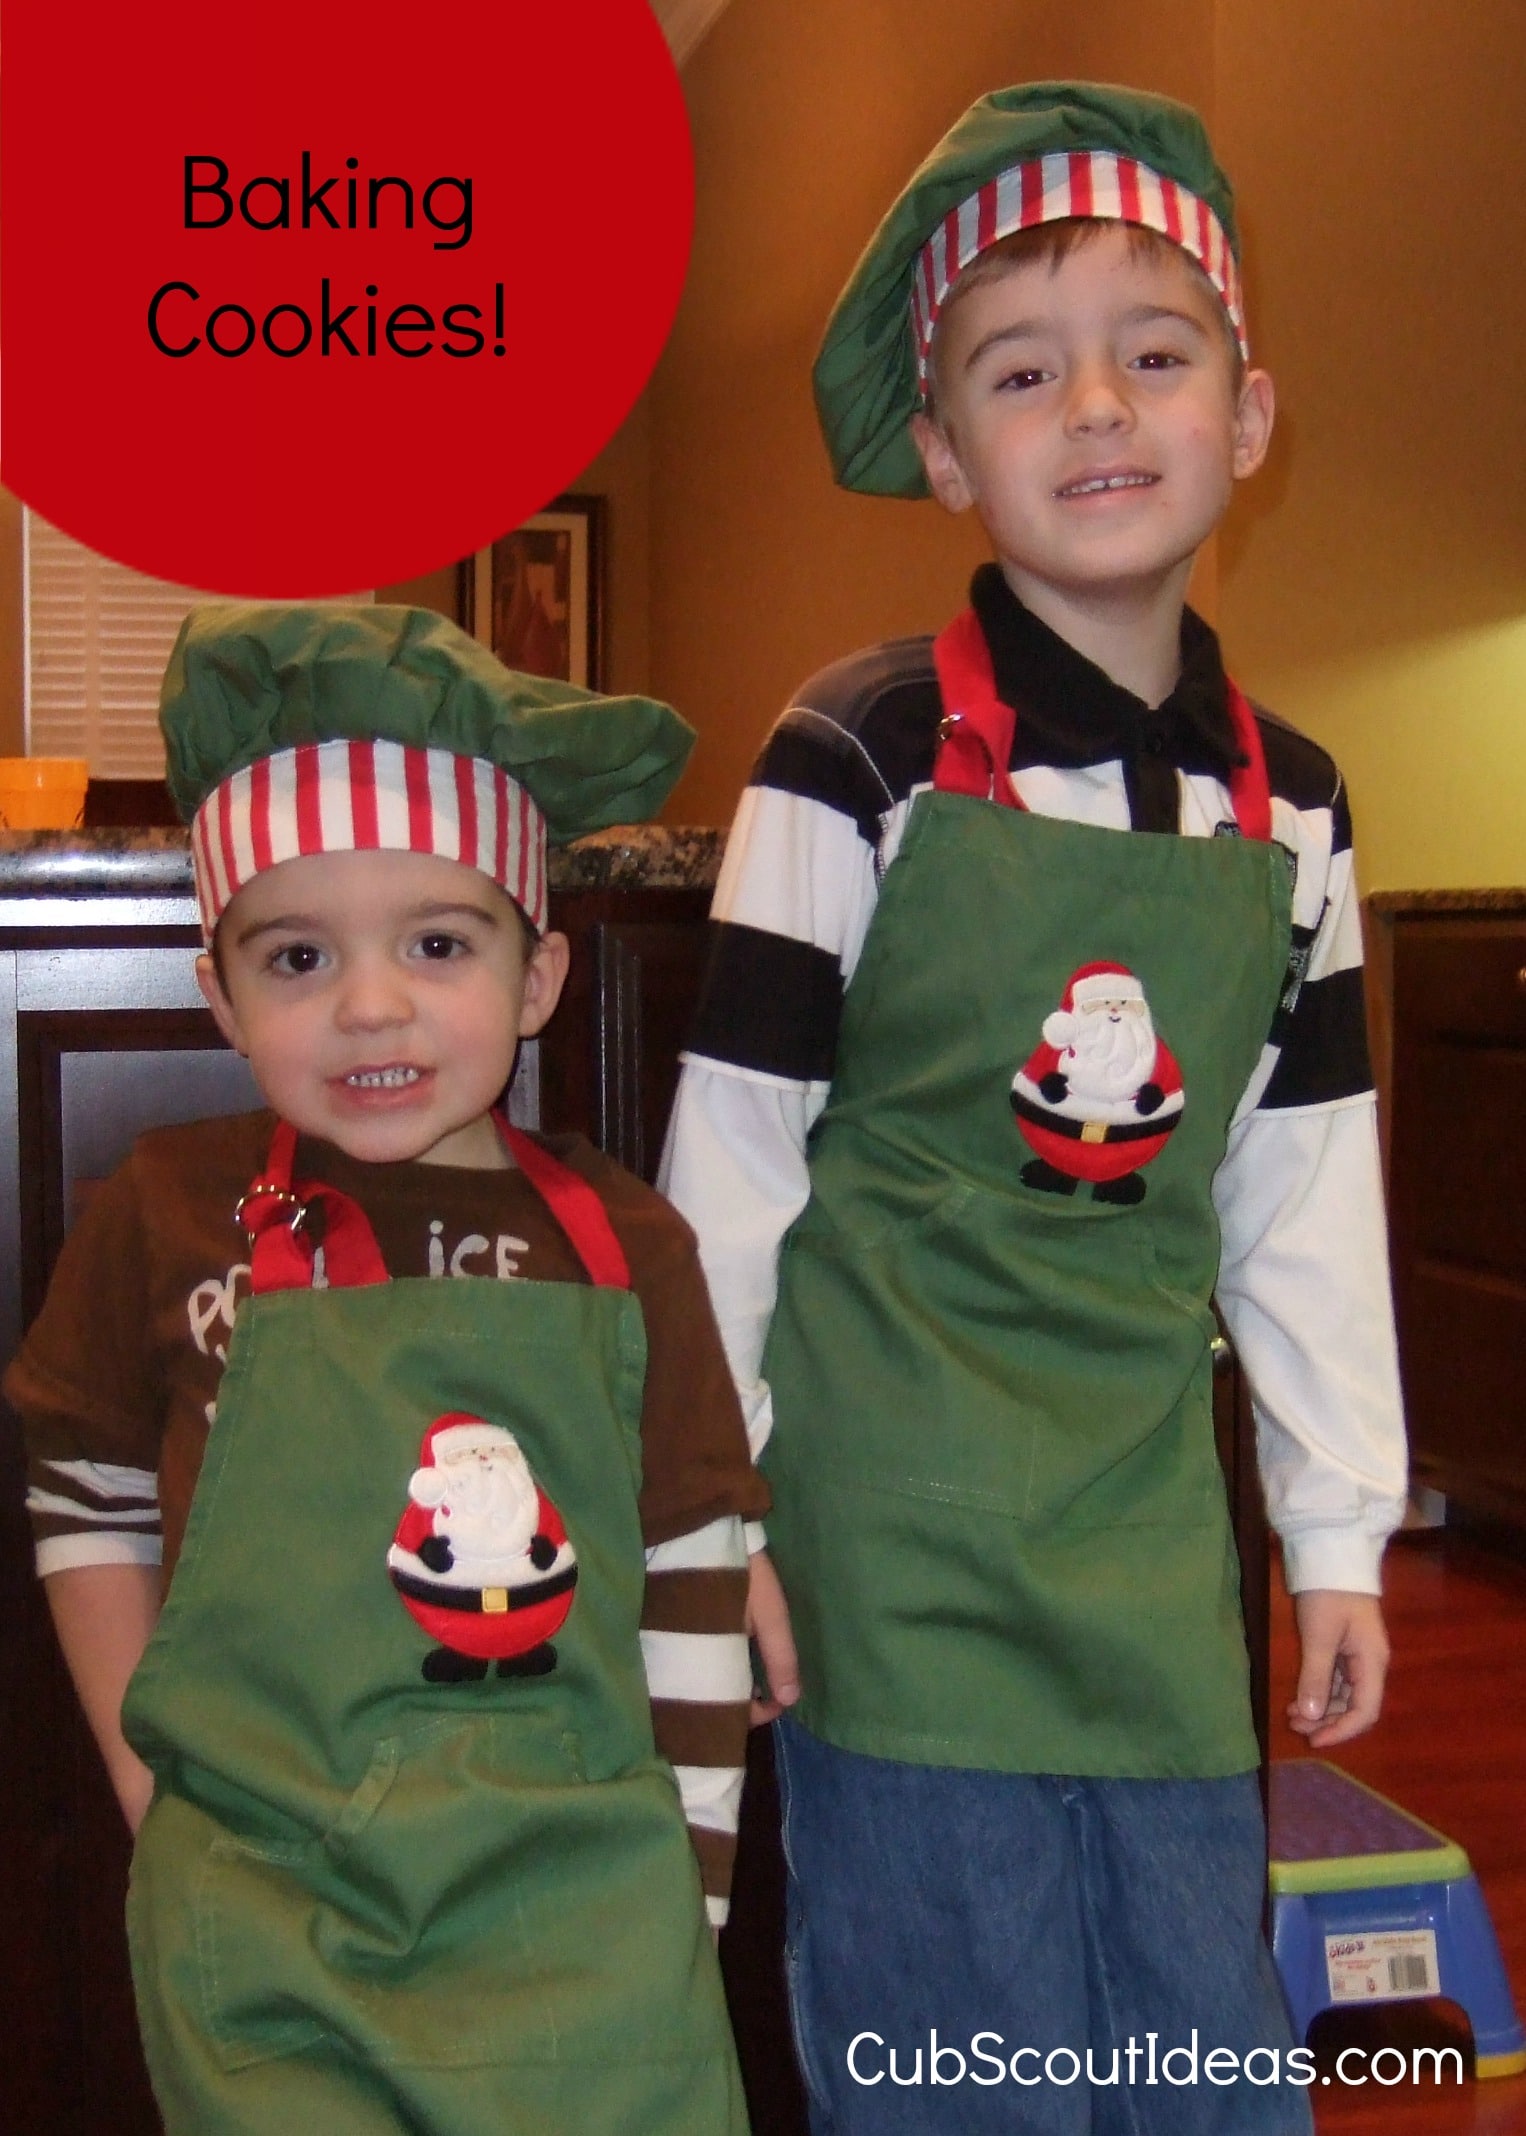 cub scout baking cookies